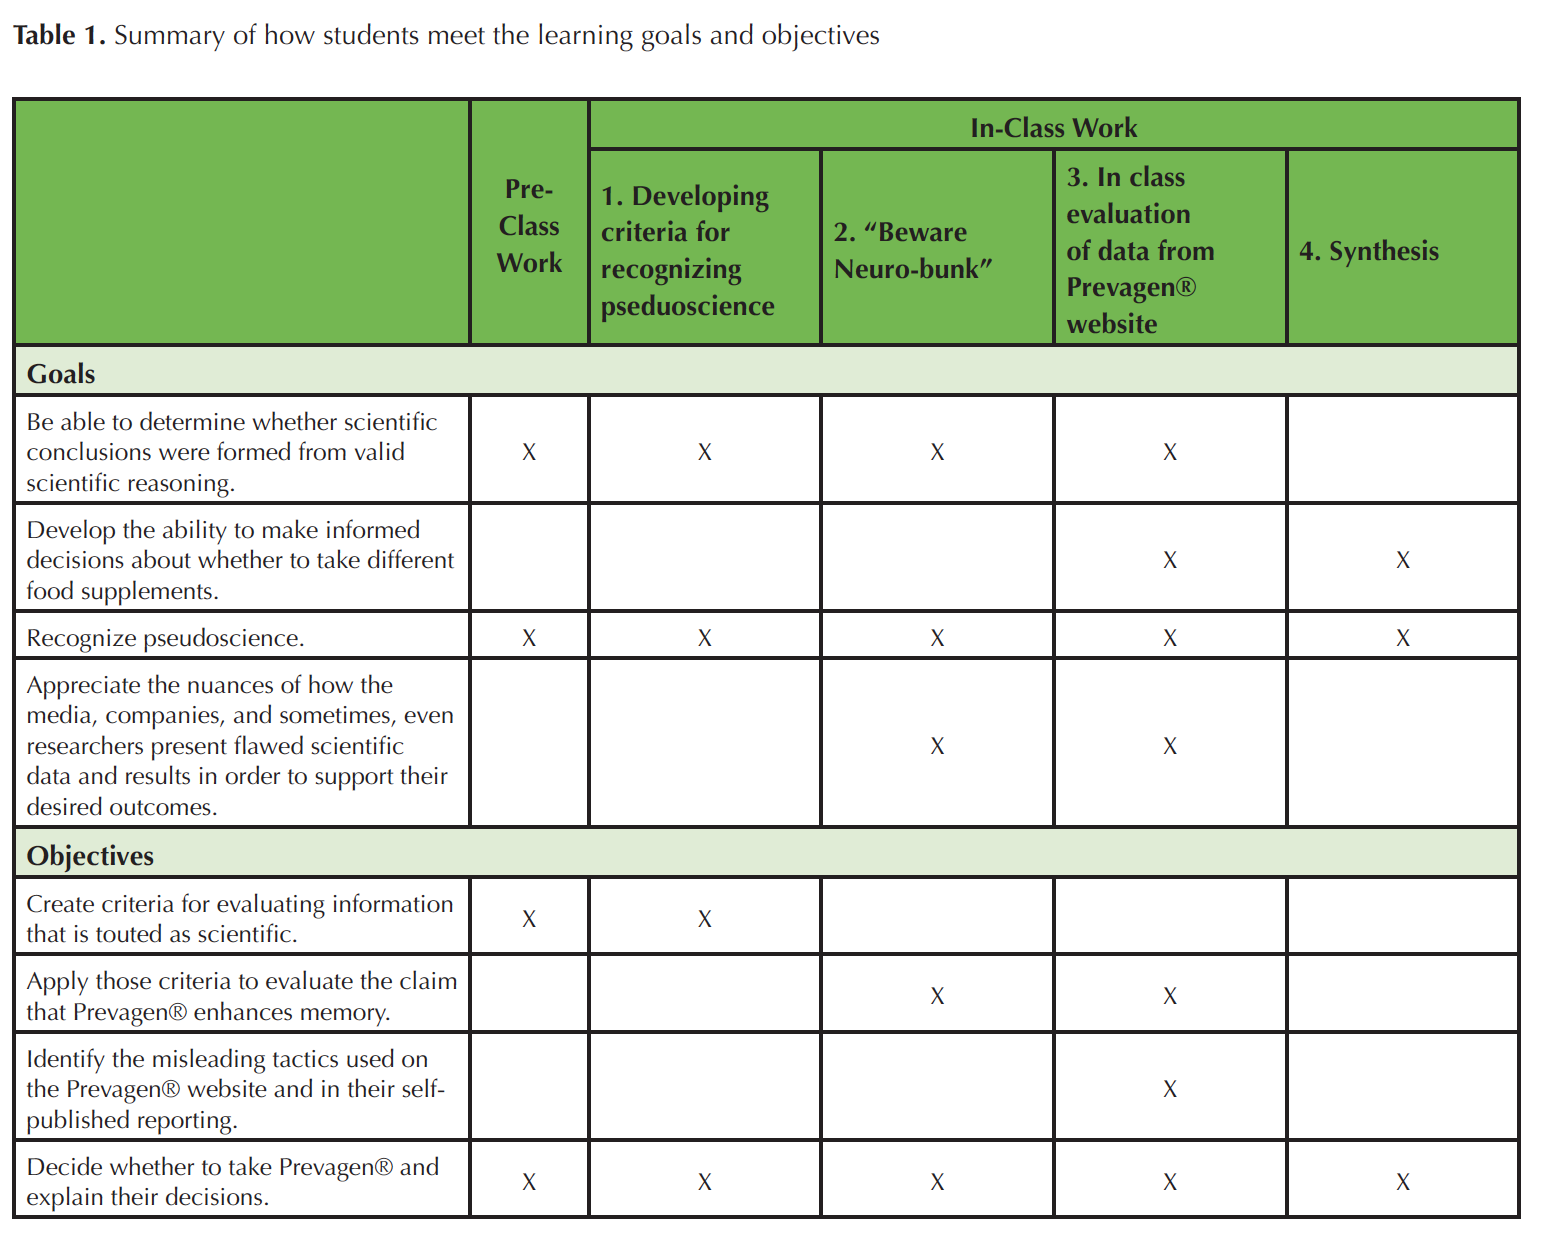 ​Table 1. Summary of how students meet the learning goals and objectives